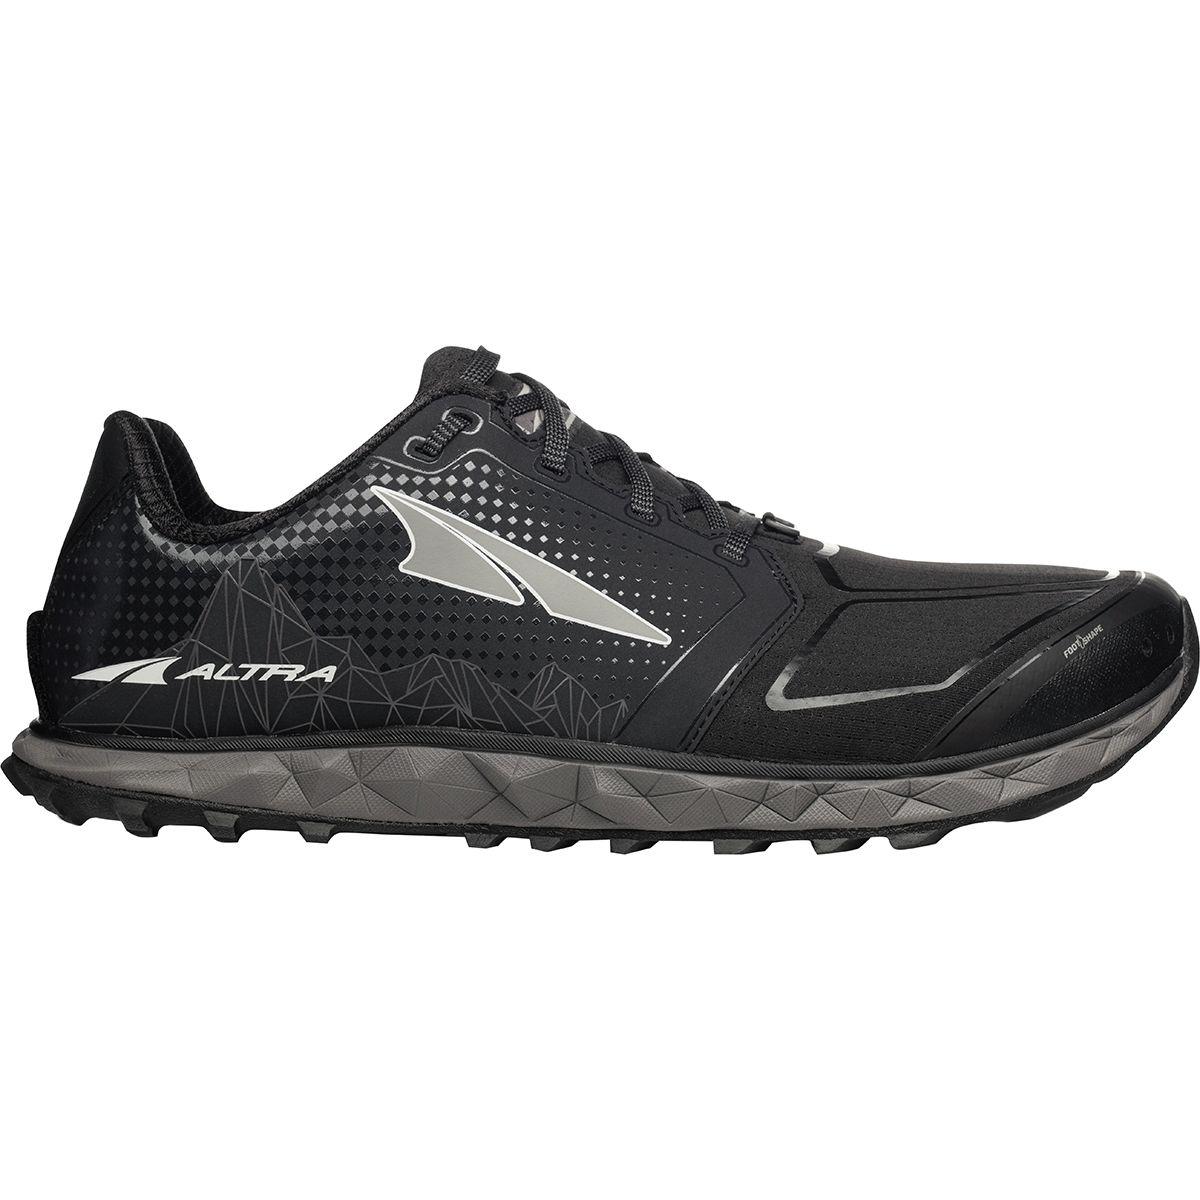 Altra Rubber Superior 4.0 Trail Running Shoe in Black for Men - Save 25 ...